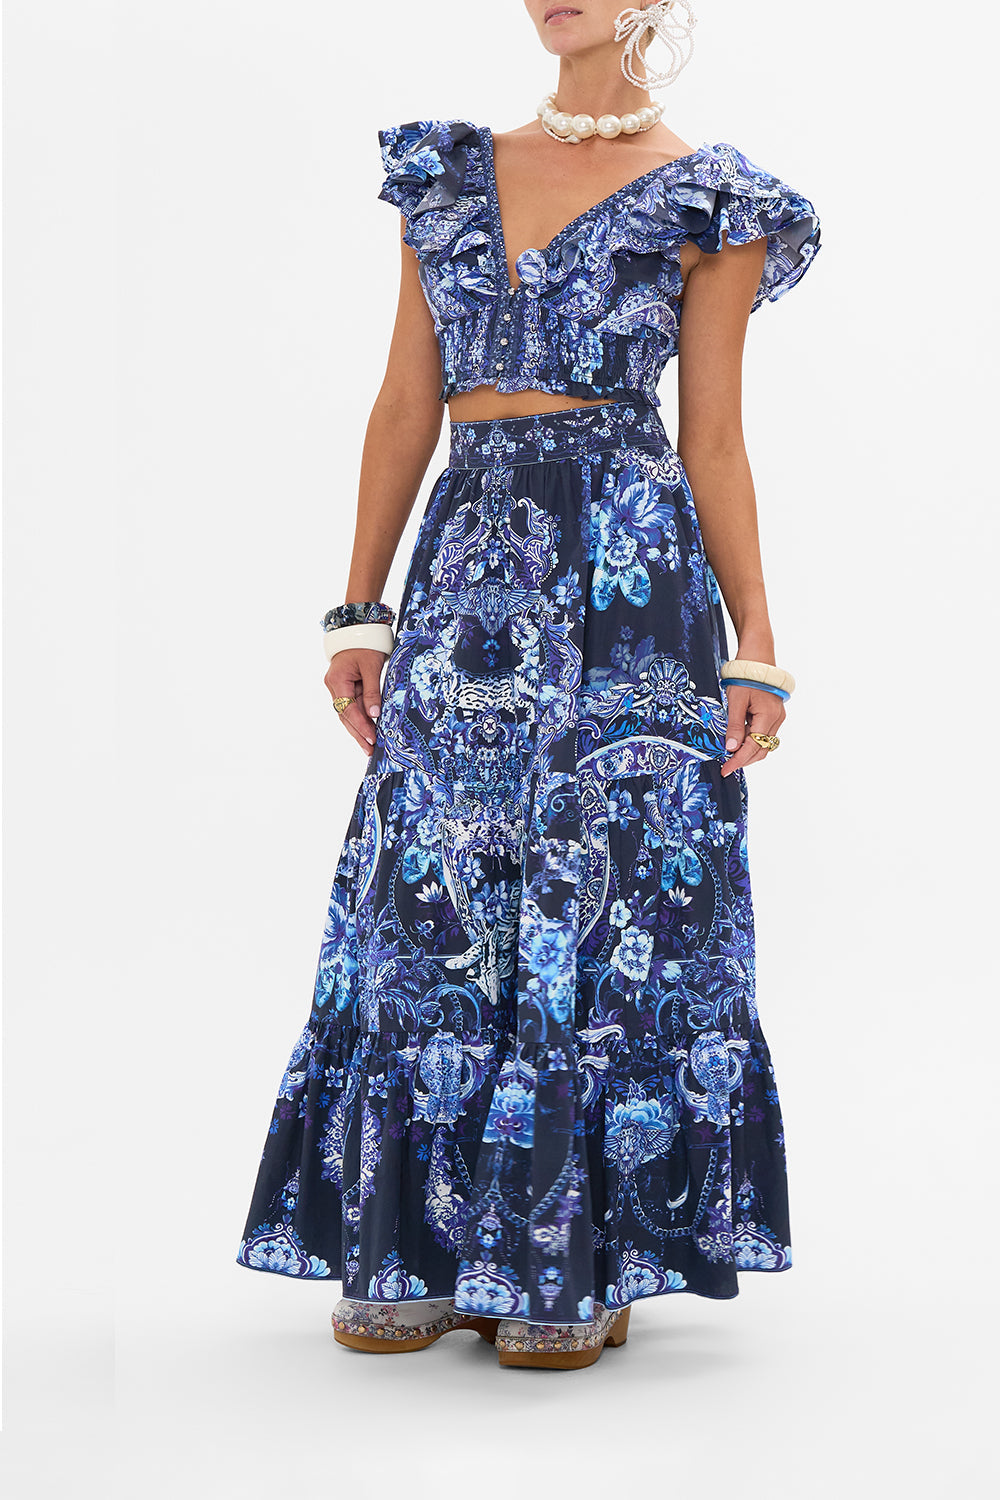 Side view of model wearing CAMILLA maxi skirt in Delft Dynasty print